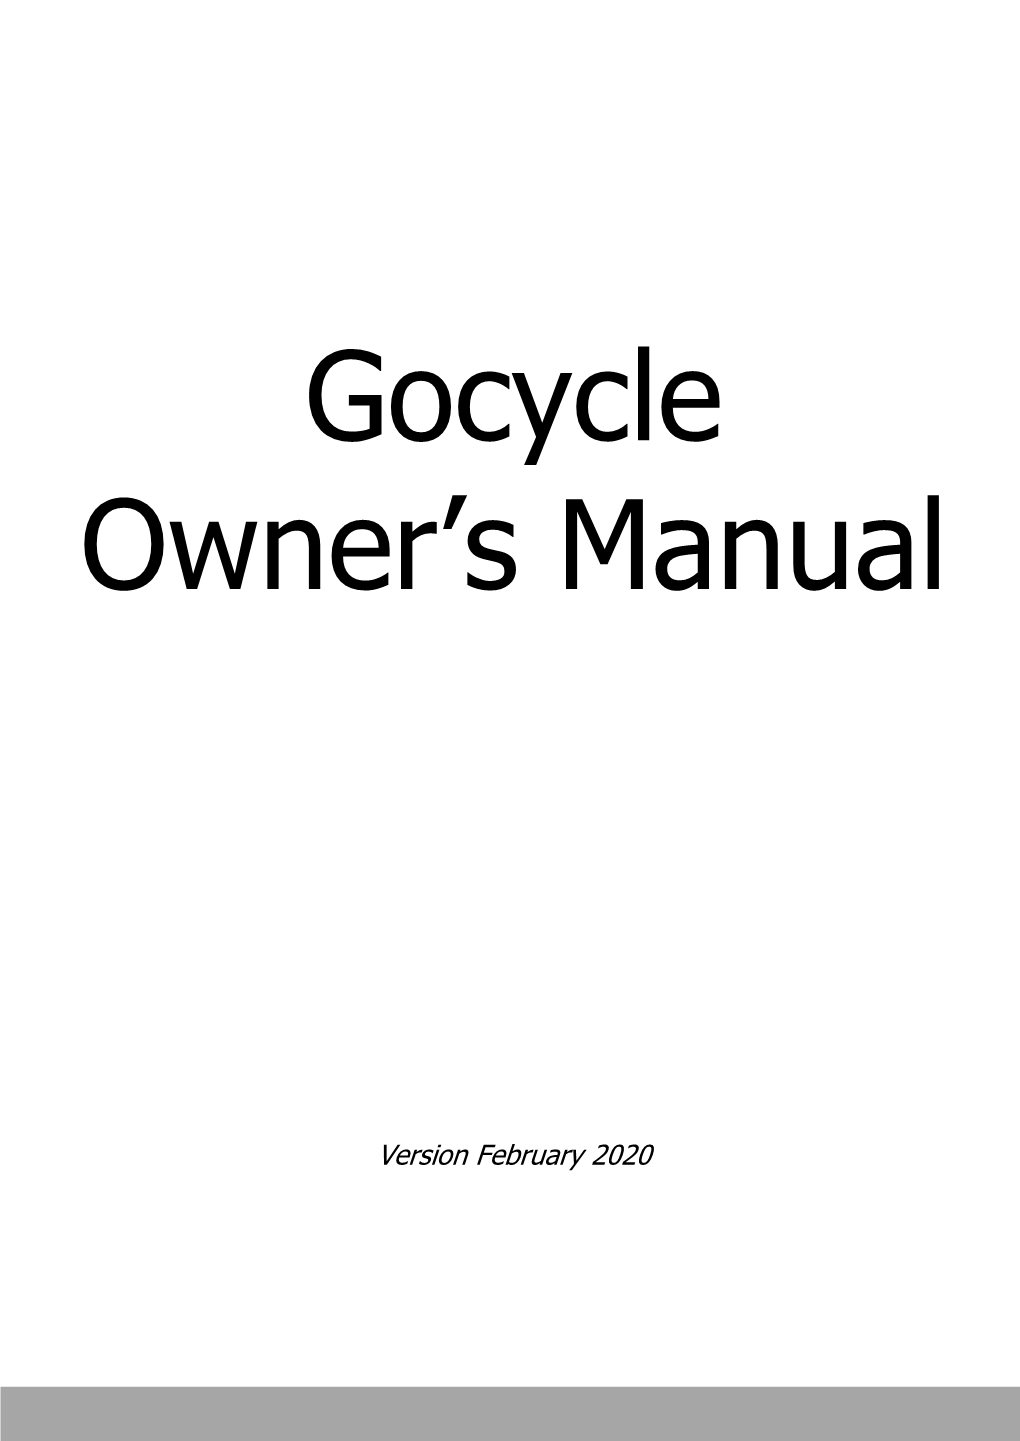 Gocycle Owner's Manual